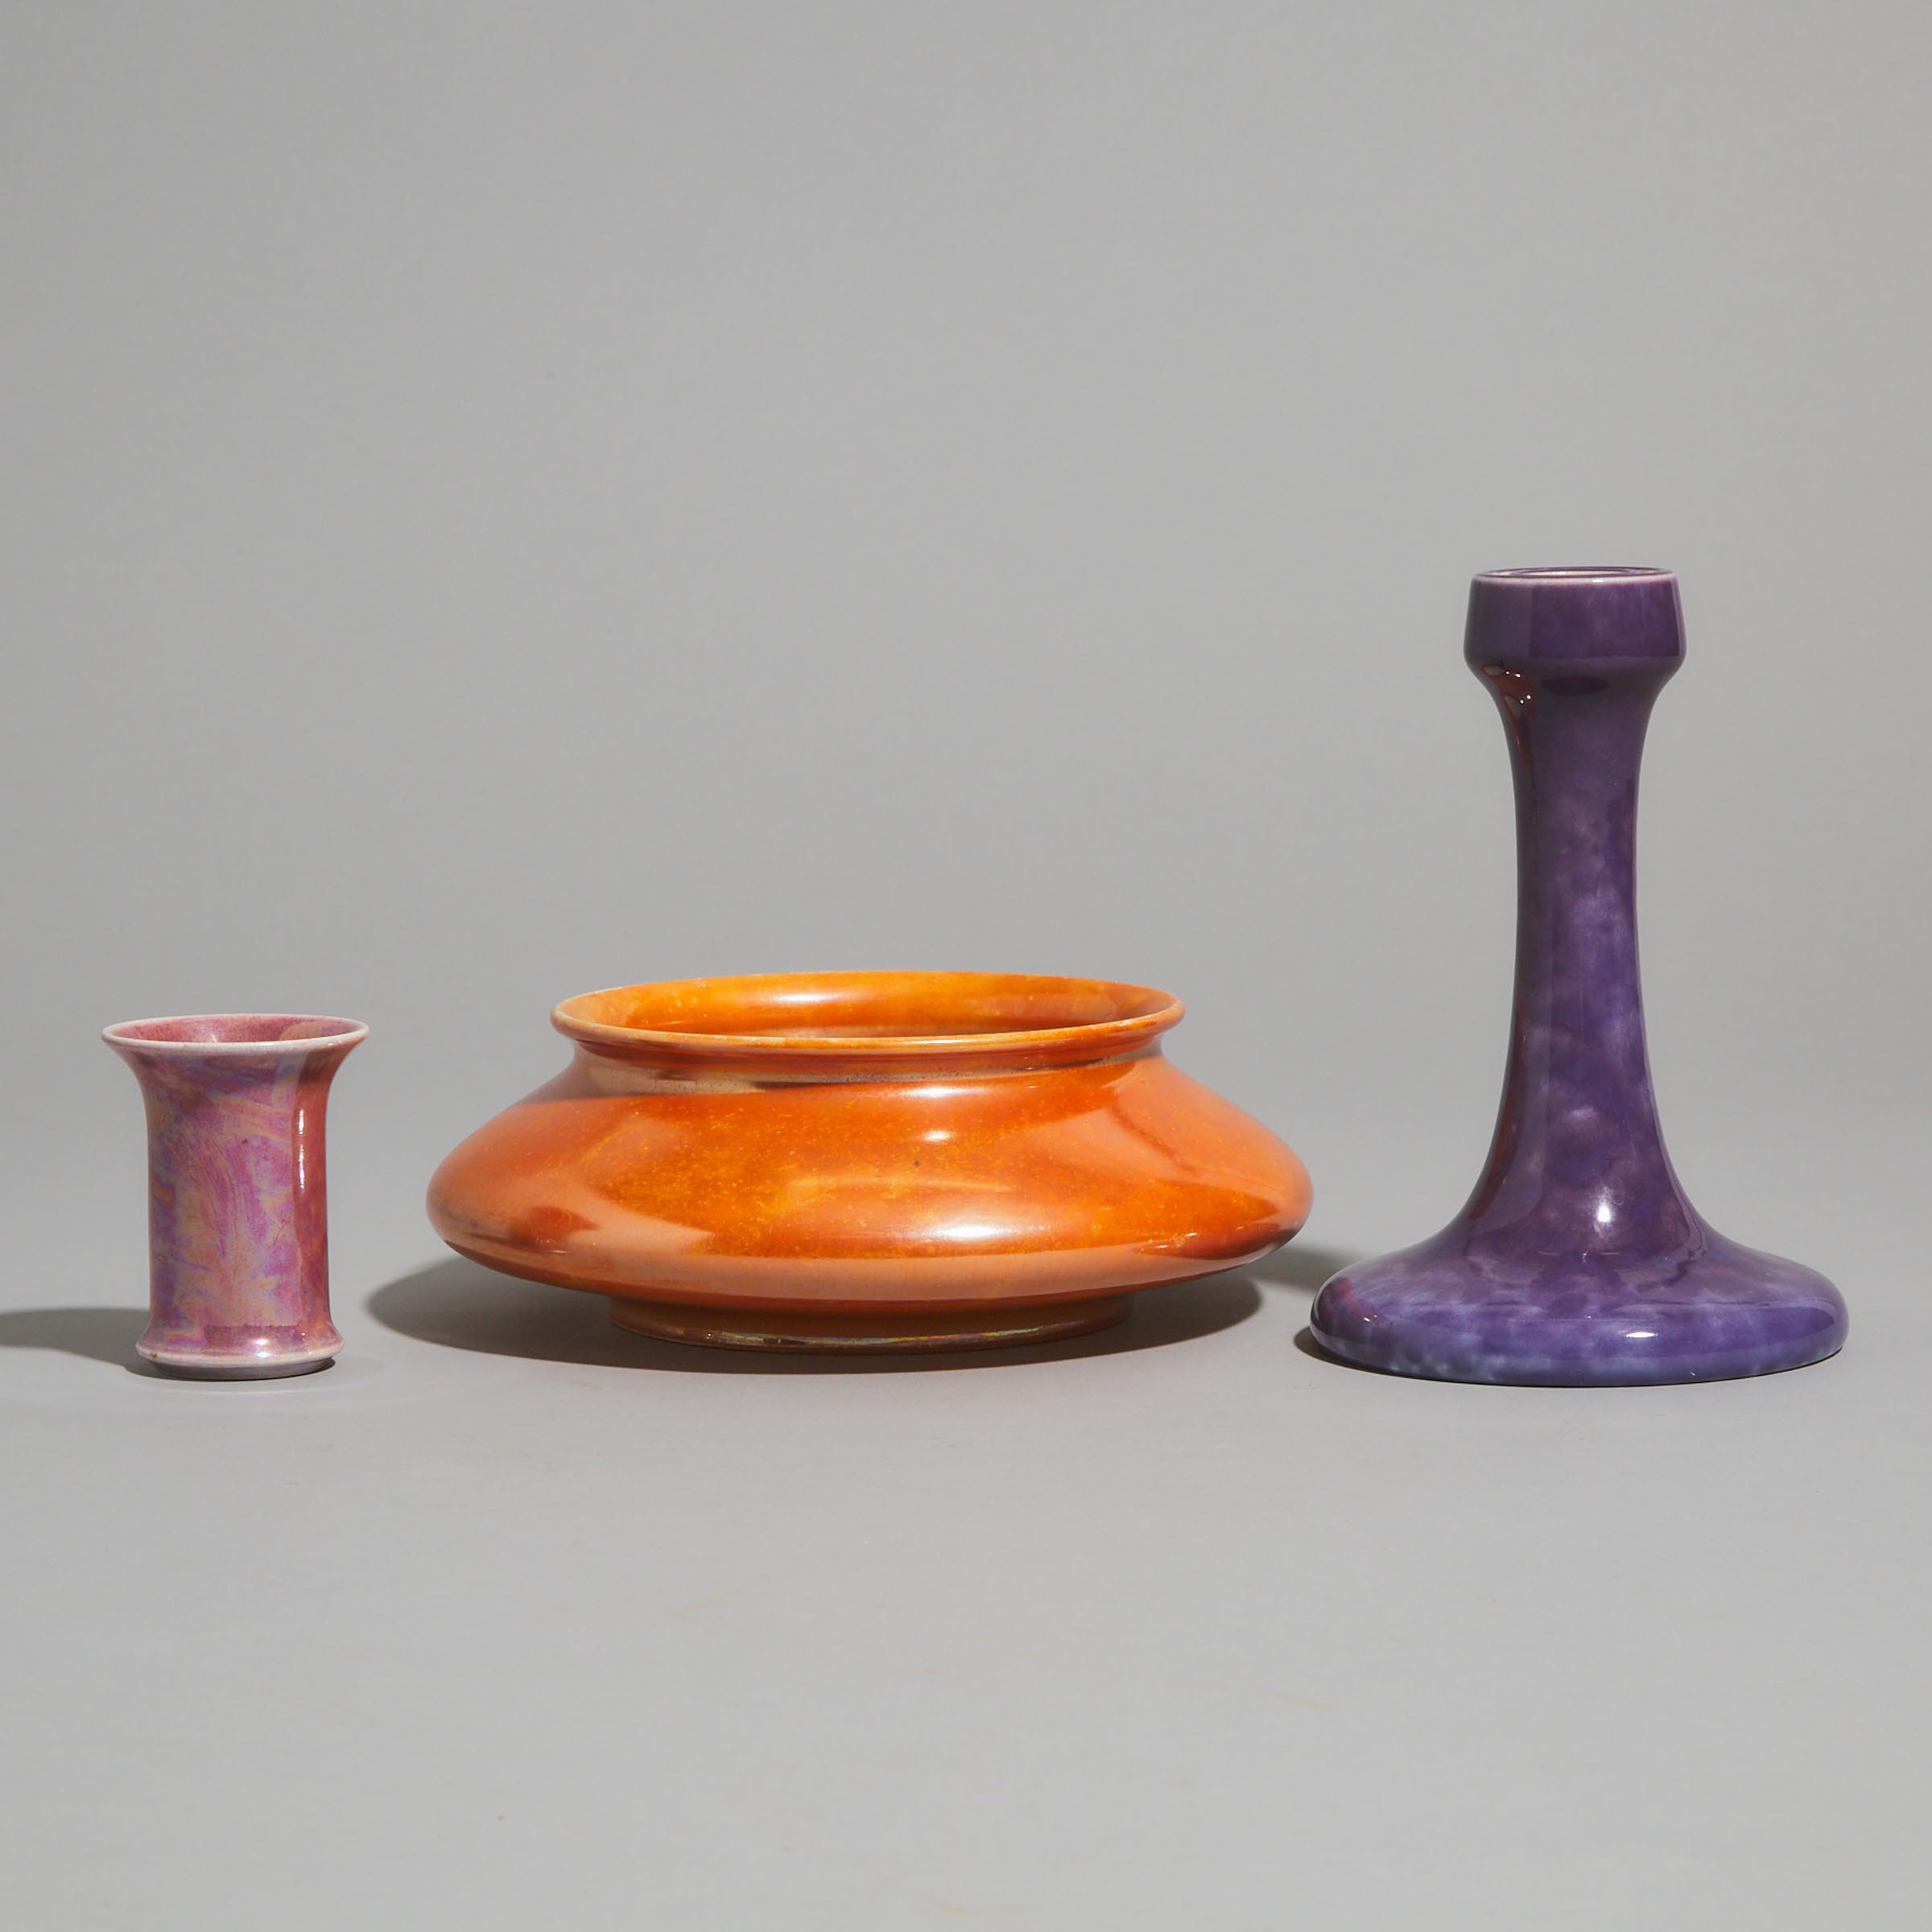 Ruskin Lustre Glazed Bowl, Candlestick, and a Small Vase, 1915-20